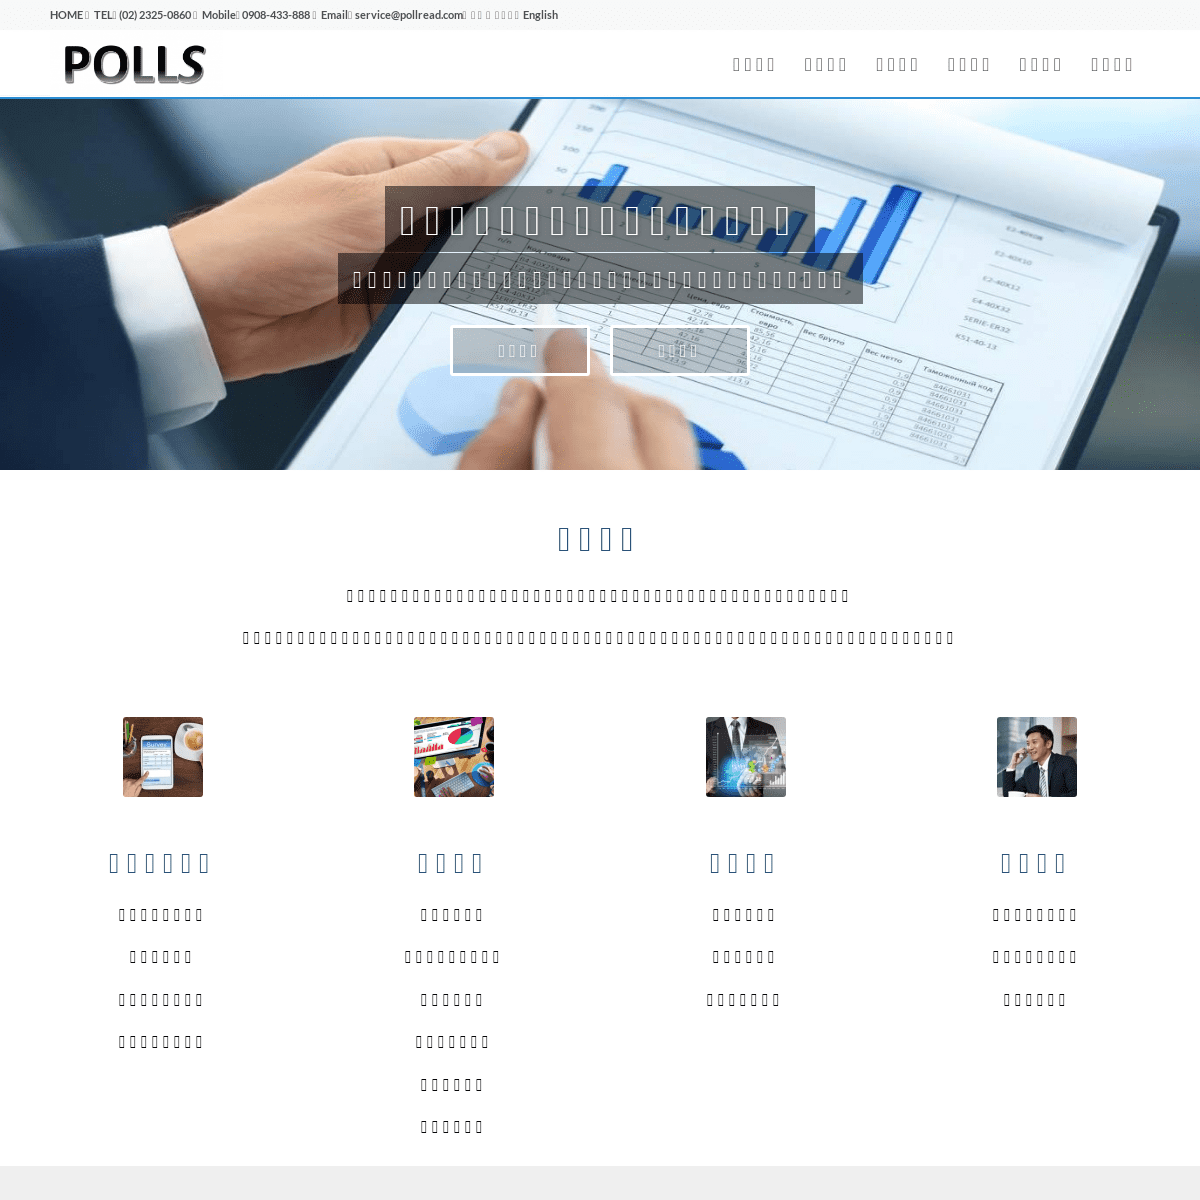 A complete backup of pollread.com